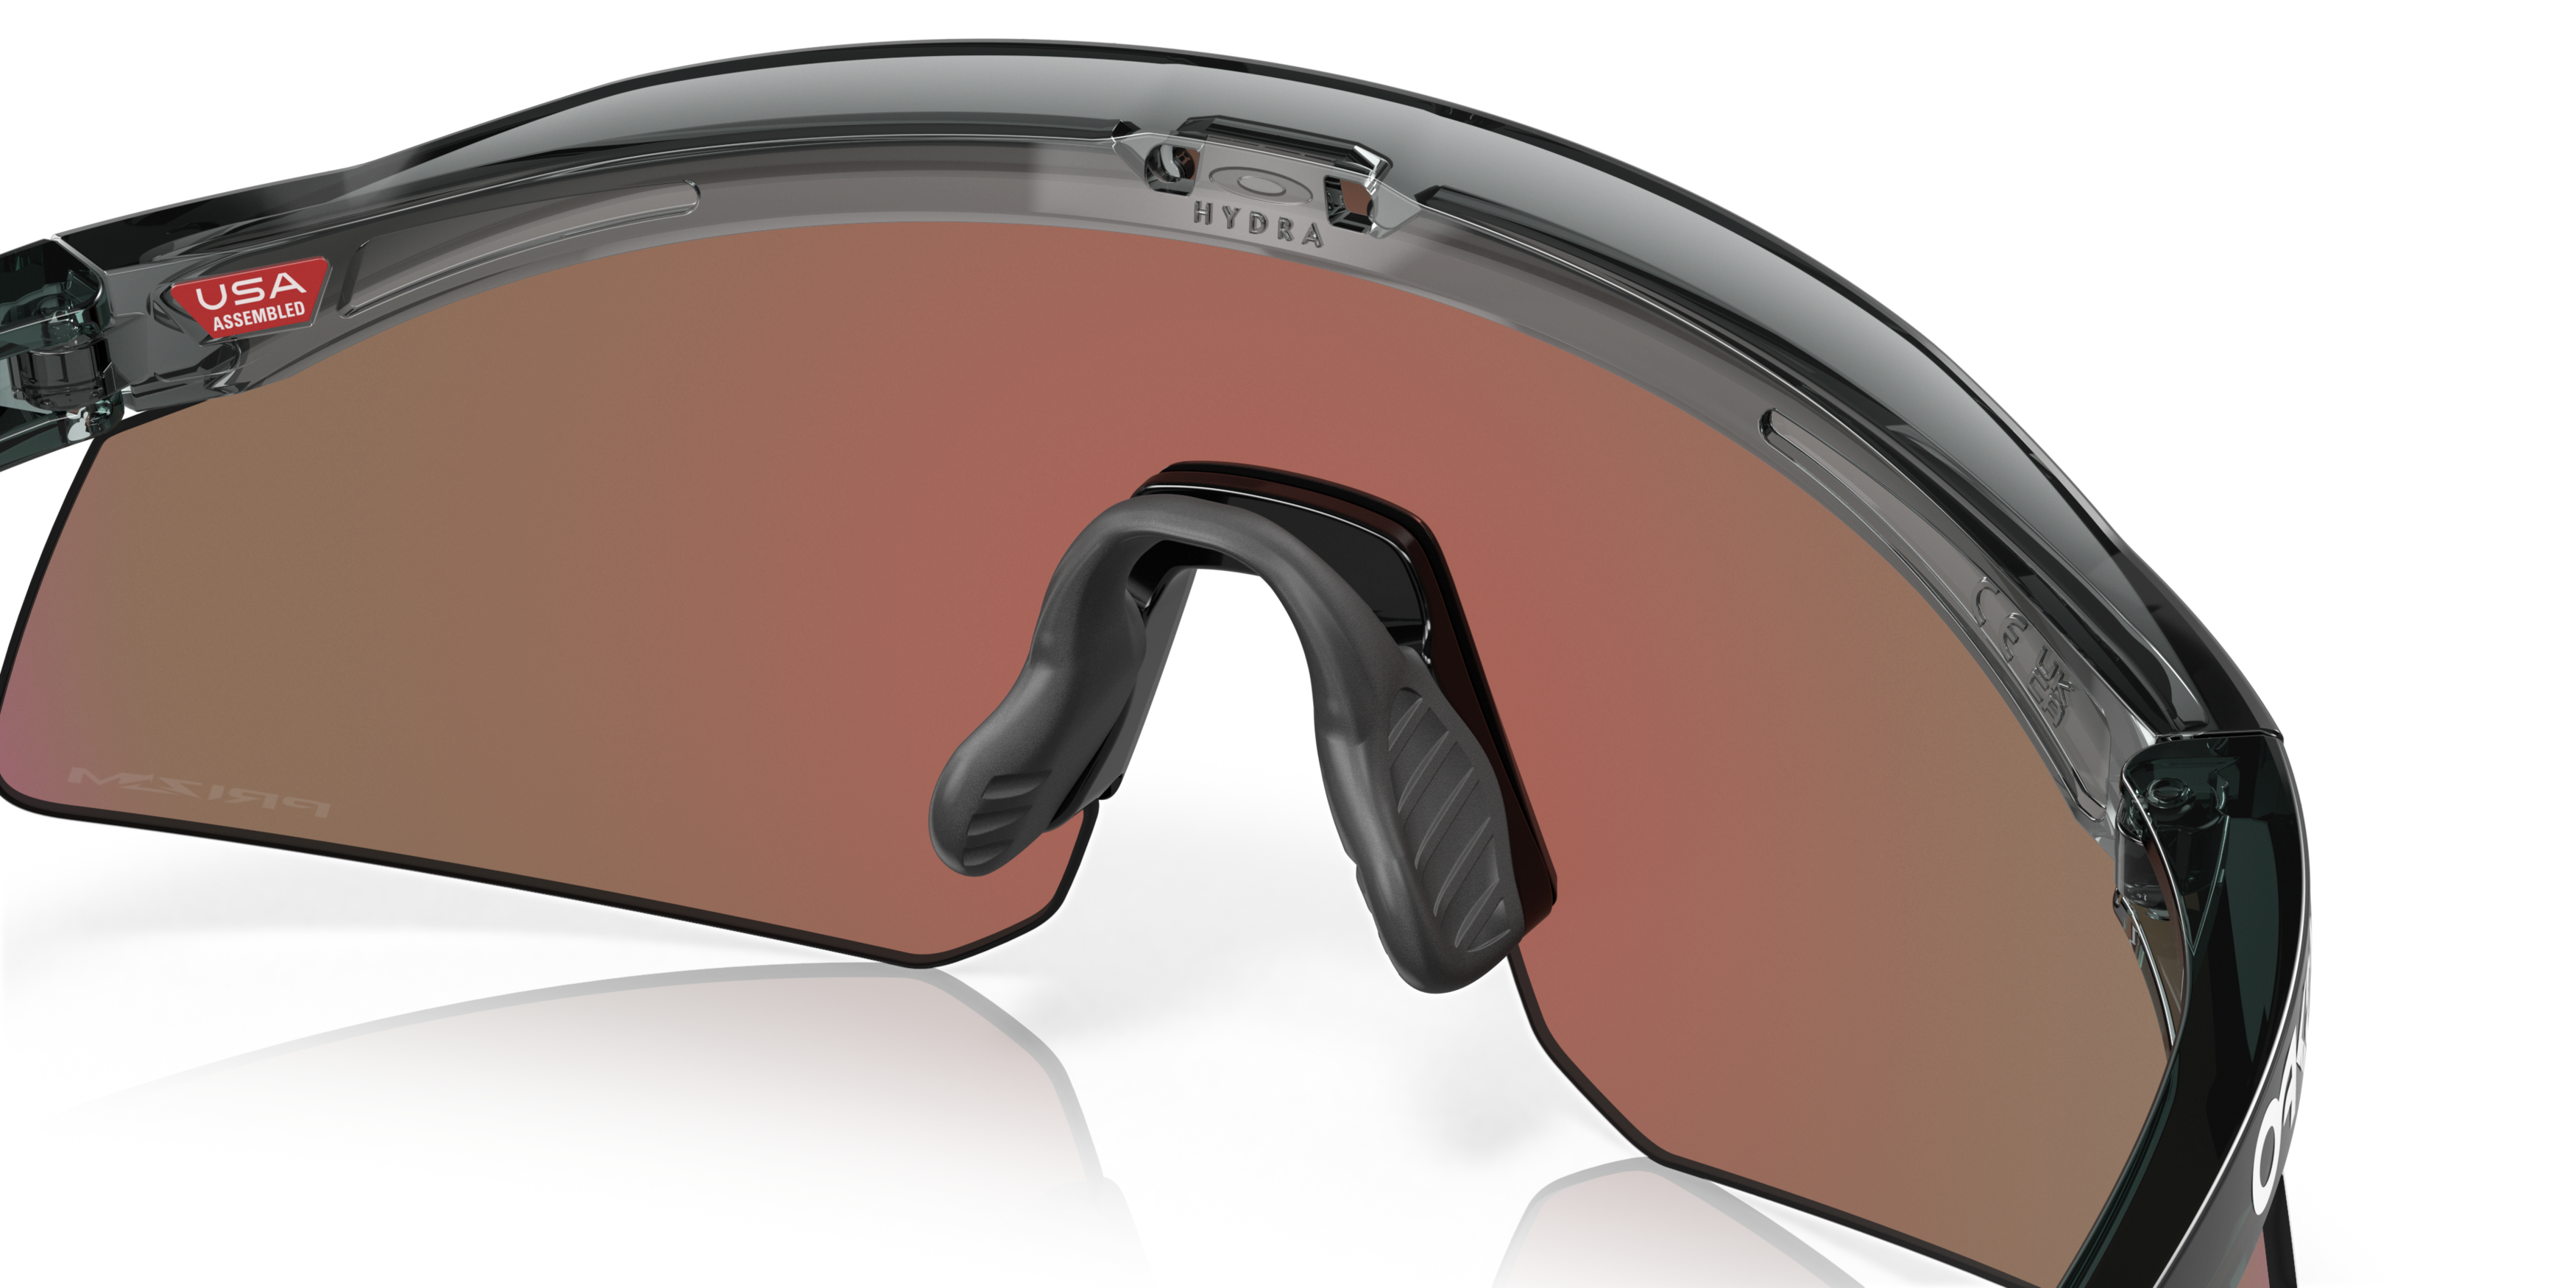 [products.image.detail03] Oakley OO9229 Hydra OO9229 922904